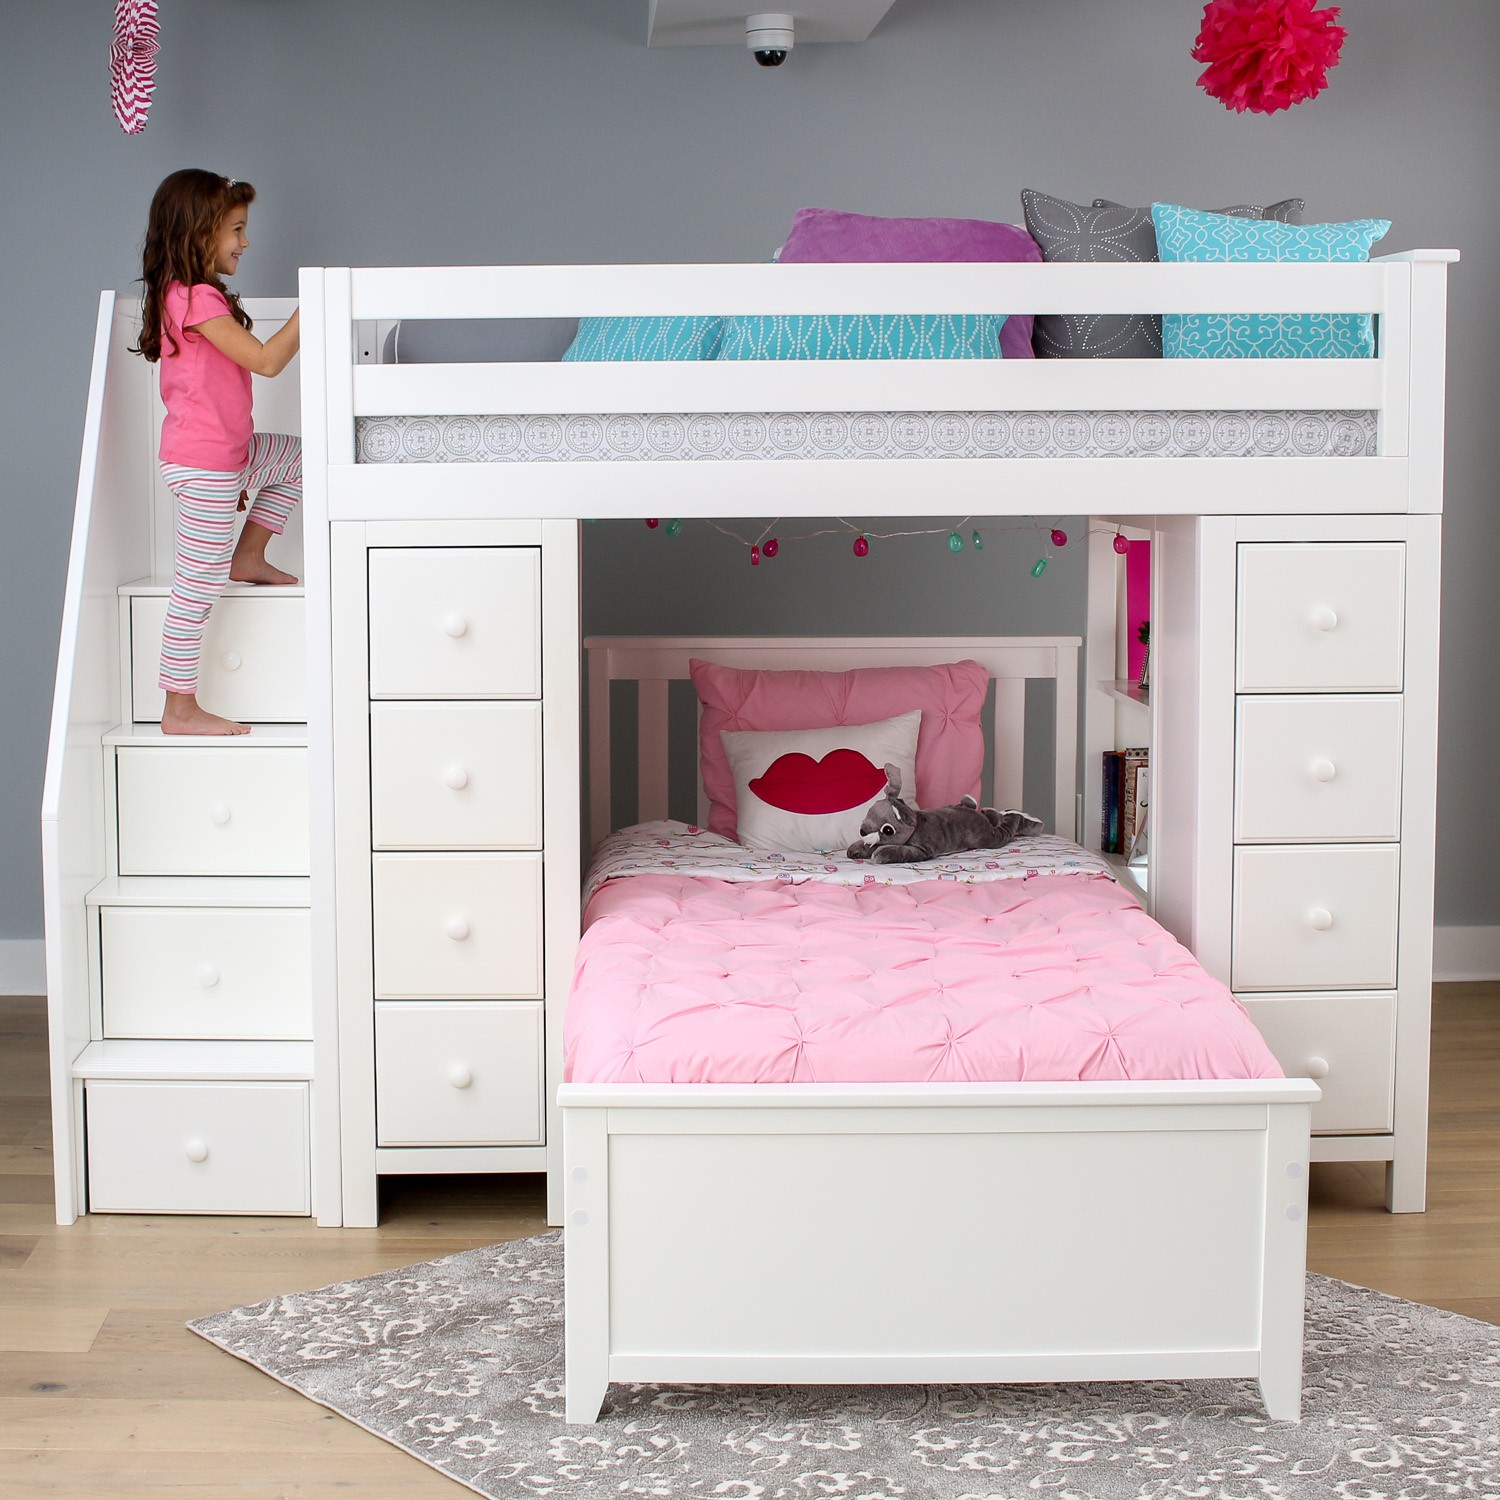 All in one staircase loft bed storage storage twin bed